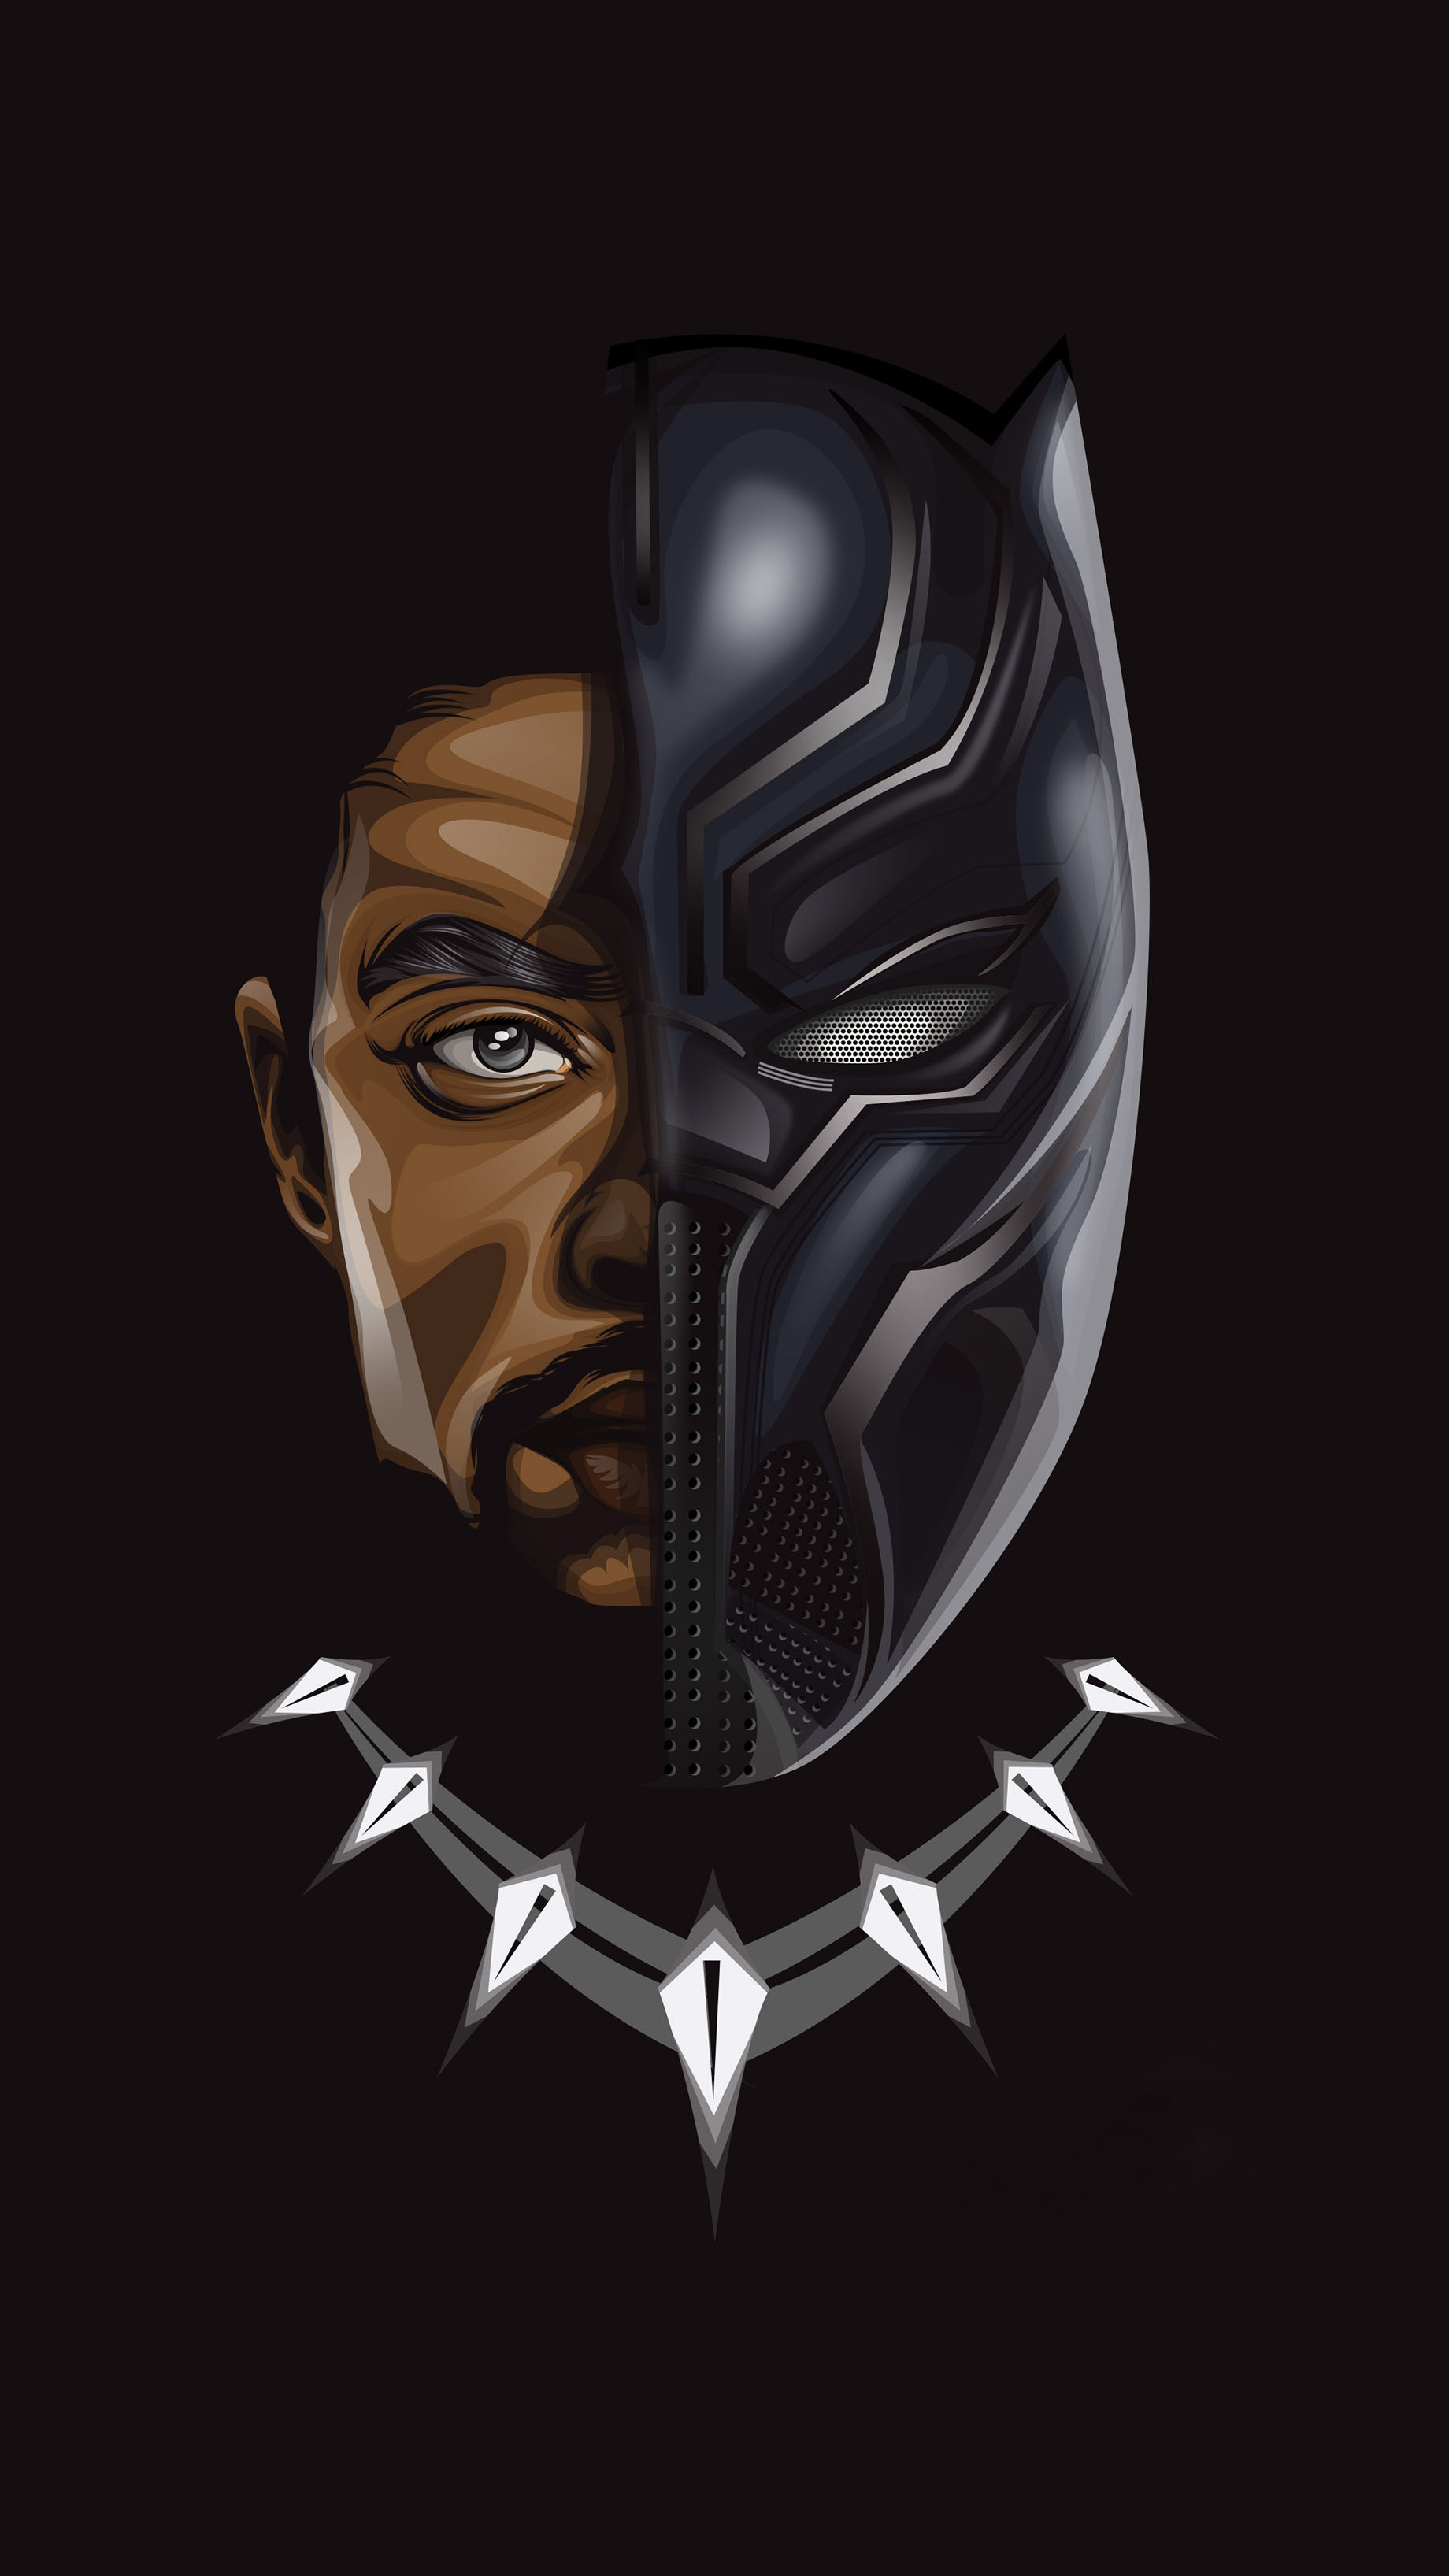 Black Panther Wallpaper - IPhone Wallpapers : iPhone Wallpapers